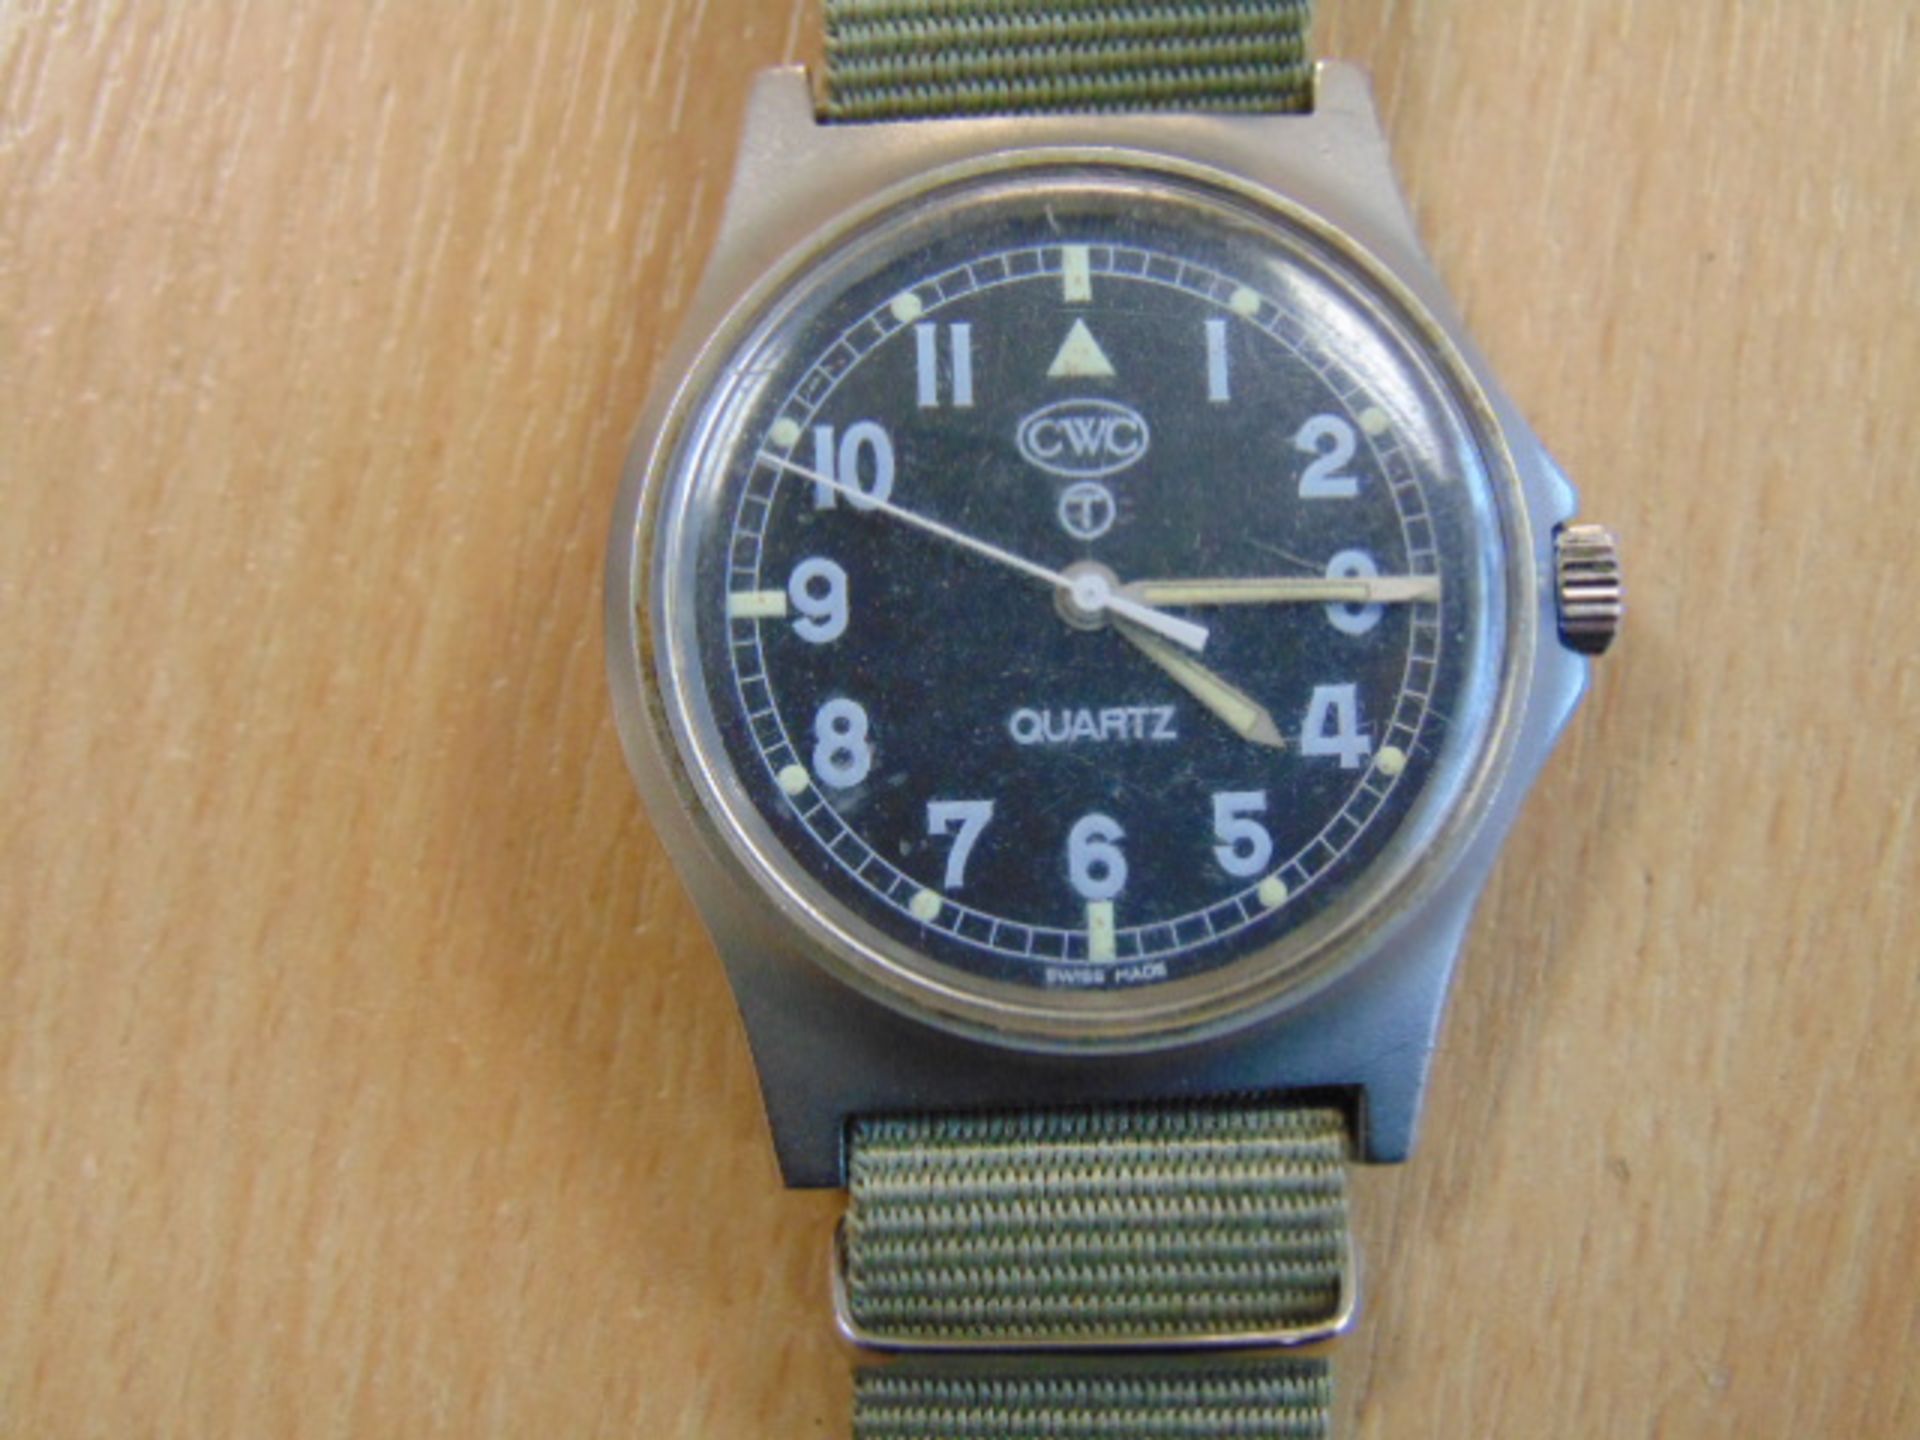 CWC W10 SERVICE WATCH NATO MARKED DATED 1991 (GULF WAR) - Image 2 of 5